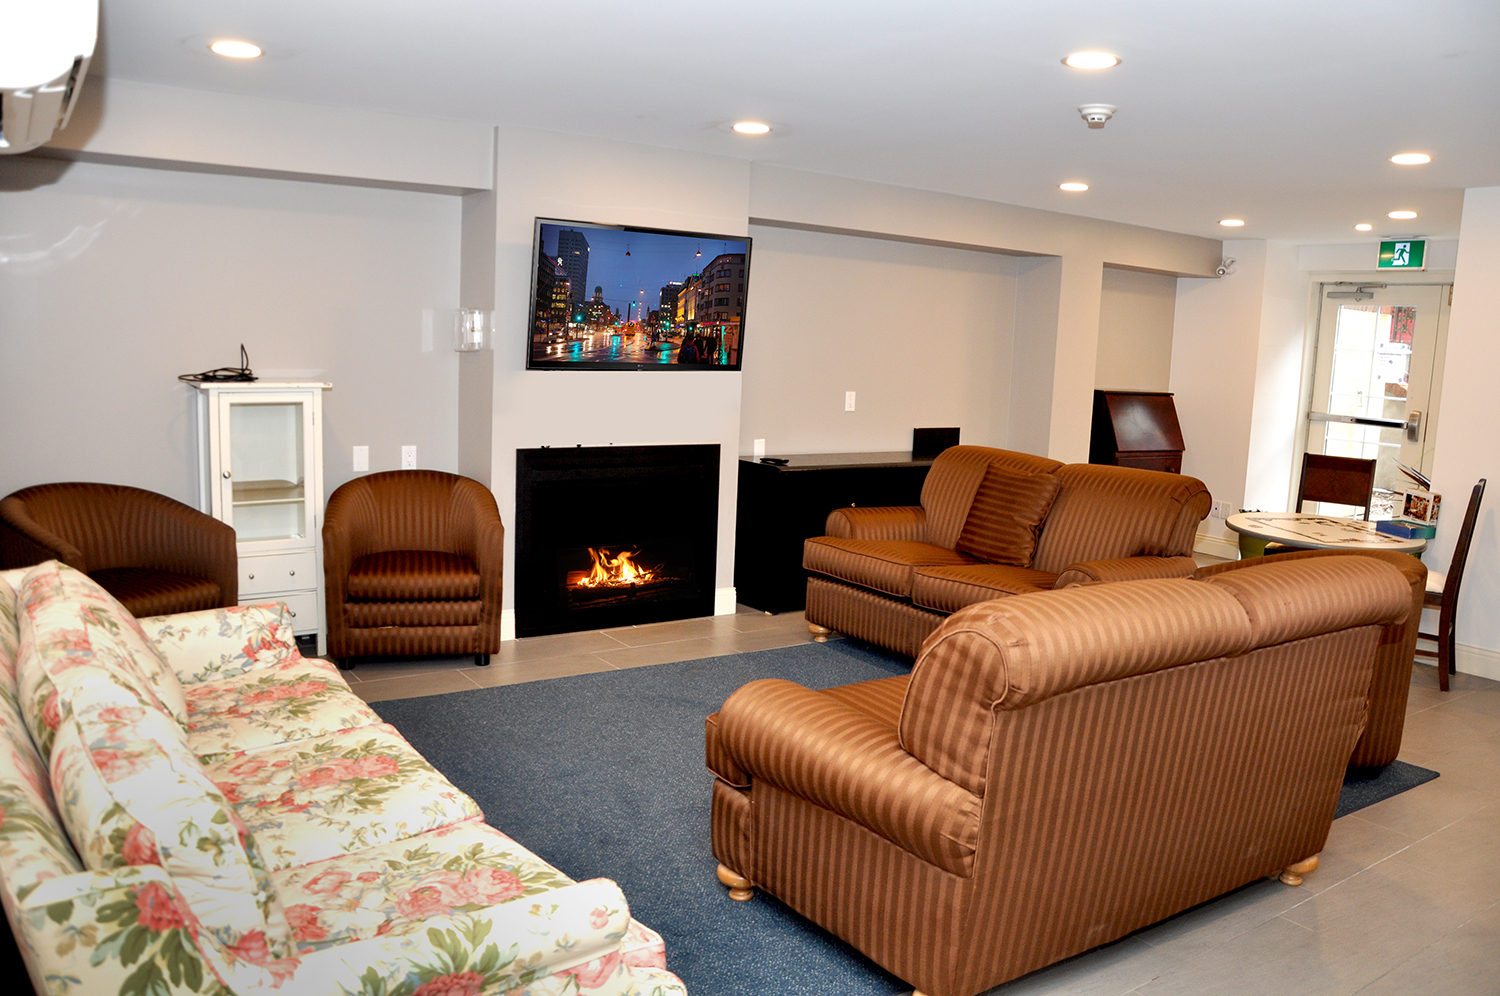 Living room with couch and chairs at renascent Treatment Centre.